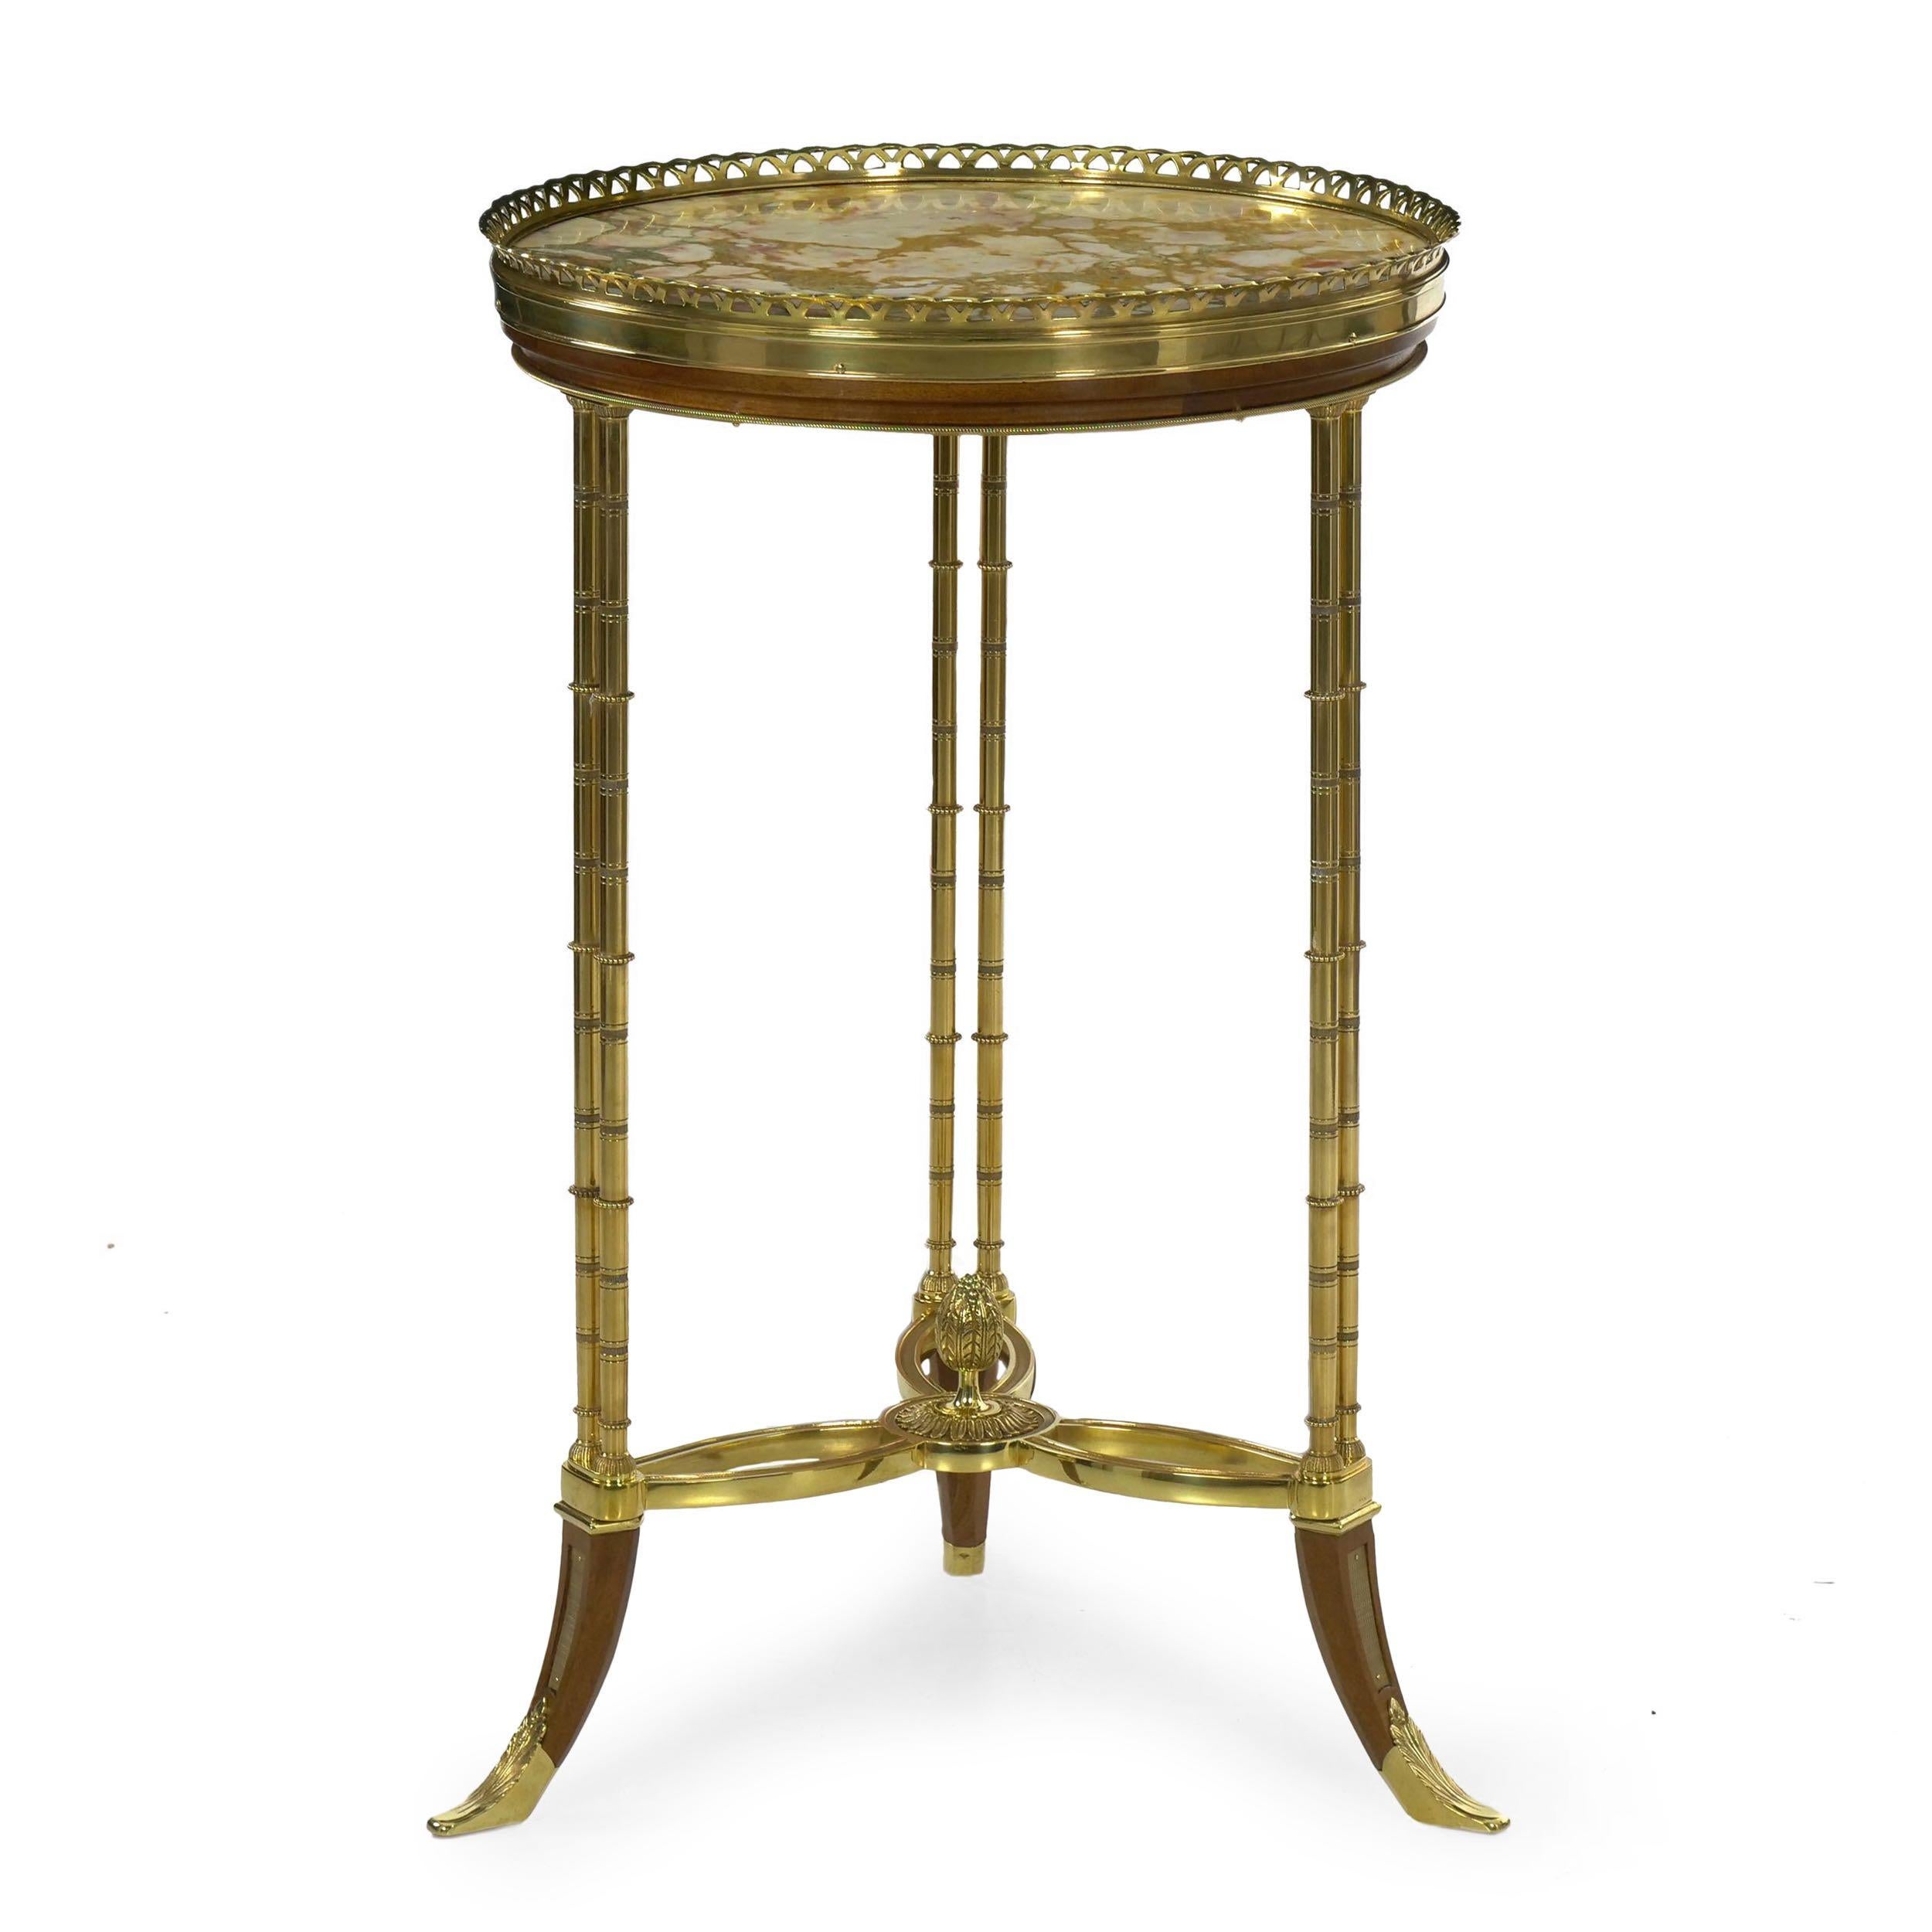 Of unusually fine quality, this extraordinary French neoclassical accent table is hand crafted of the most wonderful materials. Likely a product of the 1940s, it is executed in the manner and taste of Maison Jansen, produced for a moment in time